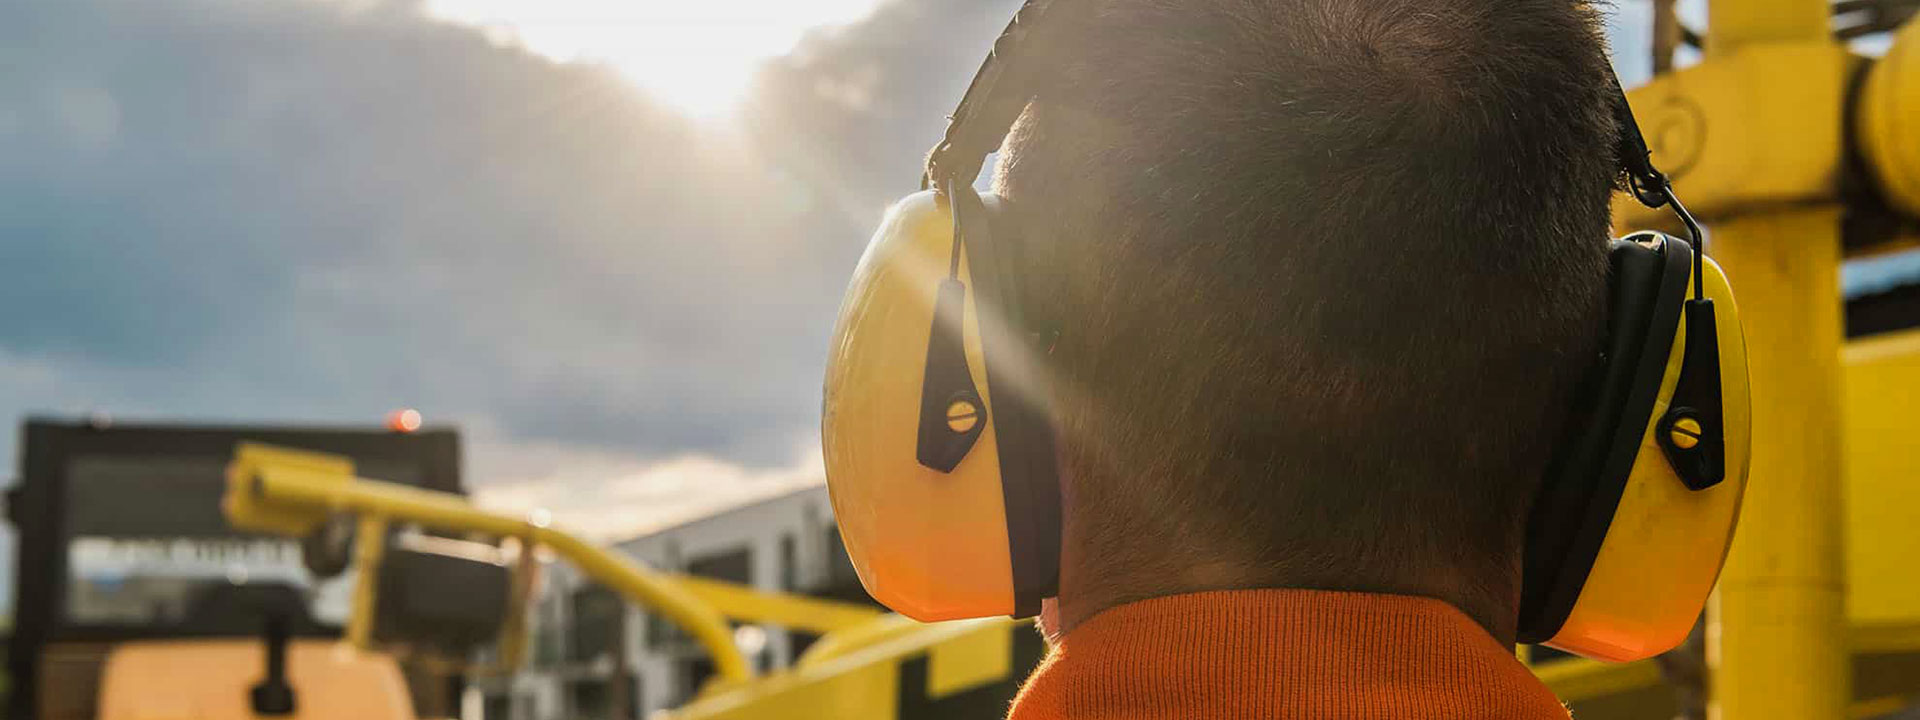 EN 352-3 Hearing Protectors - General Rules - Part 3: Protective Headphones Fitted in an Industrial Safety Helmet